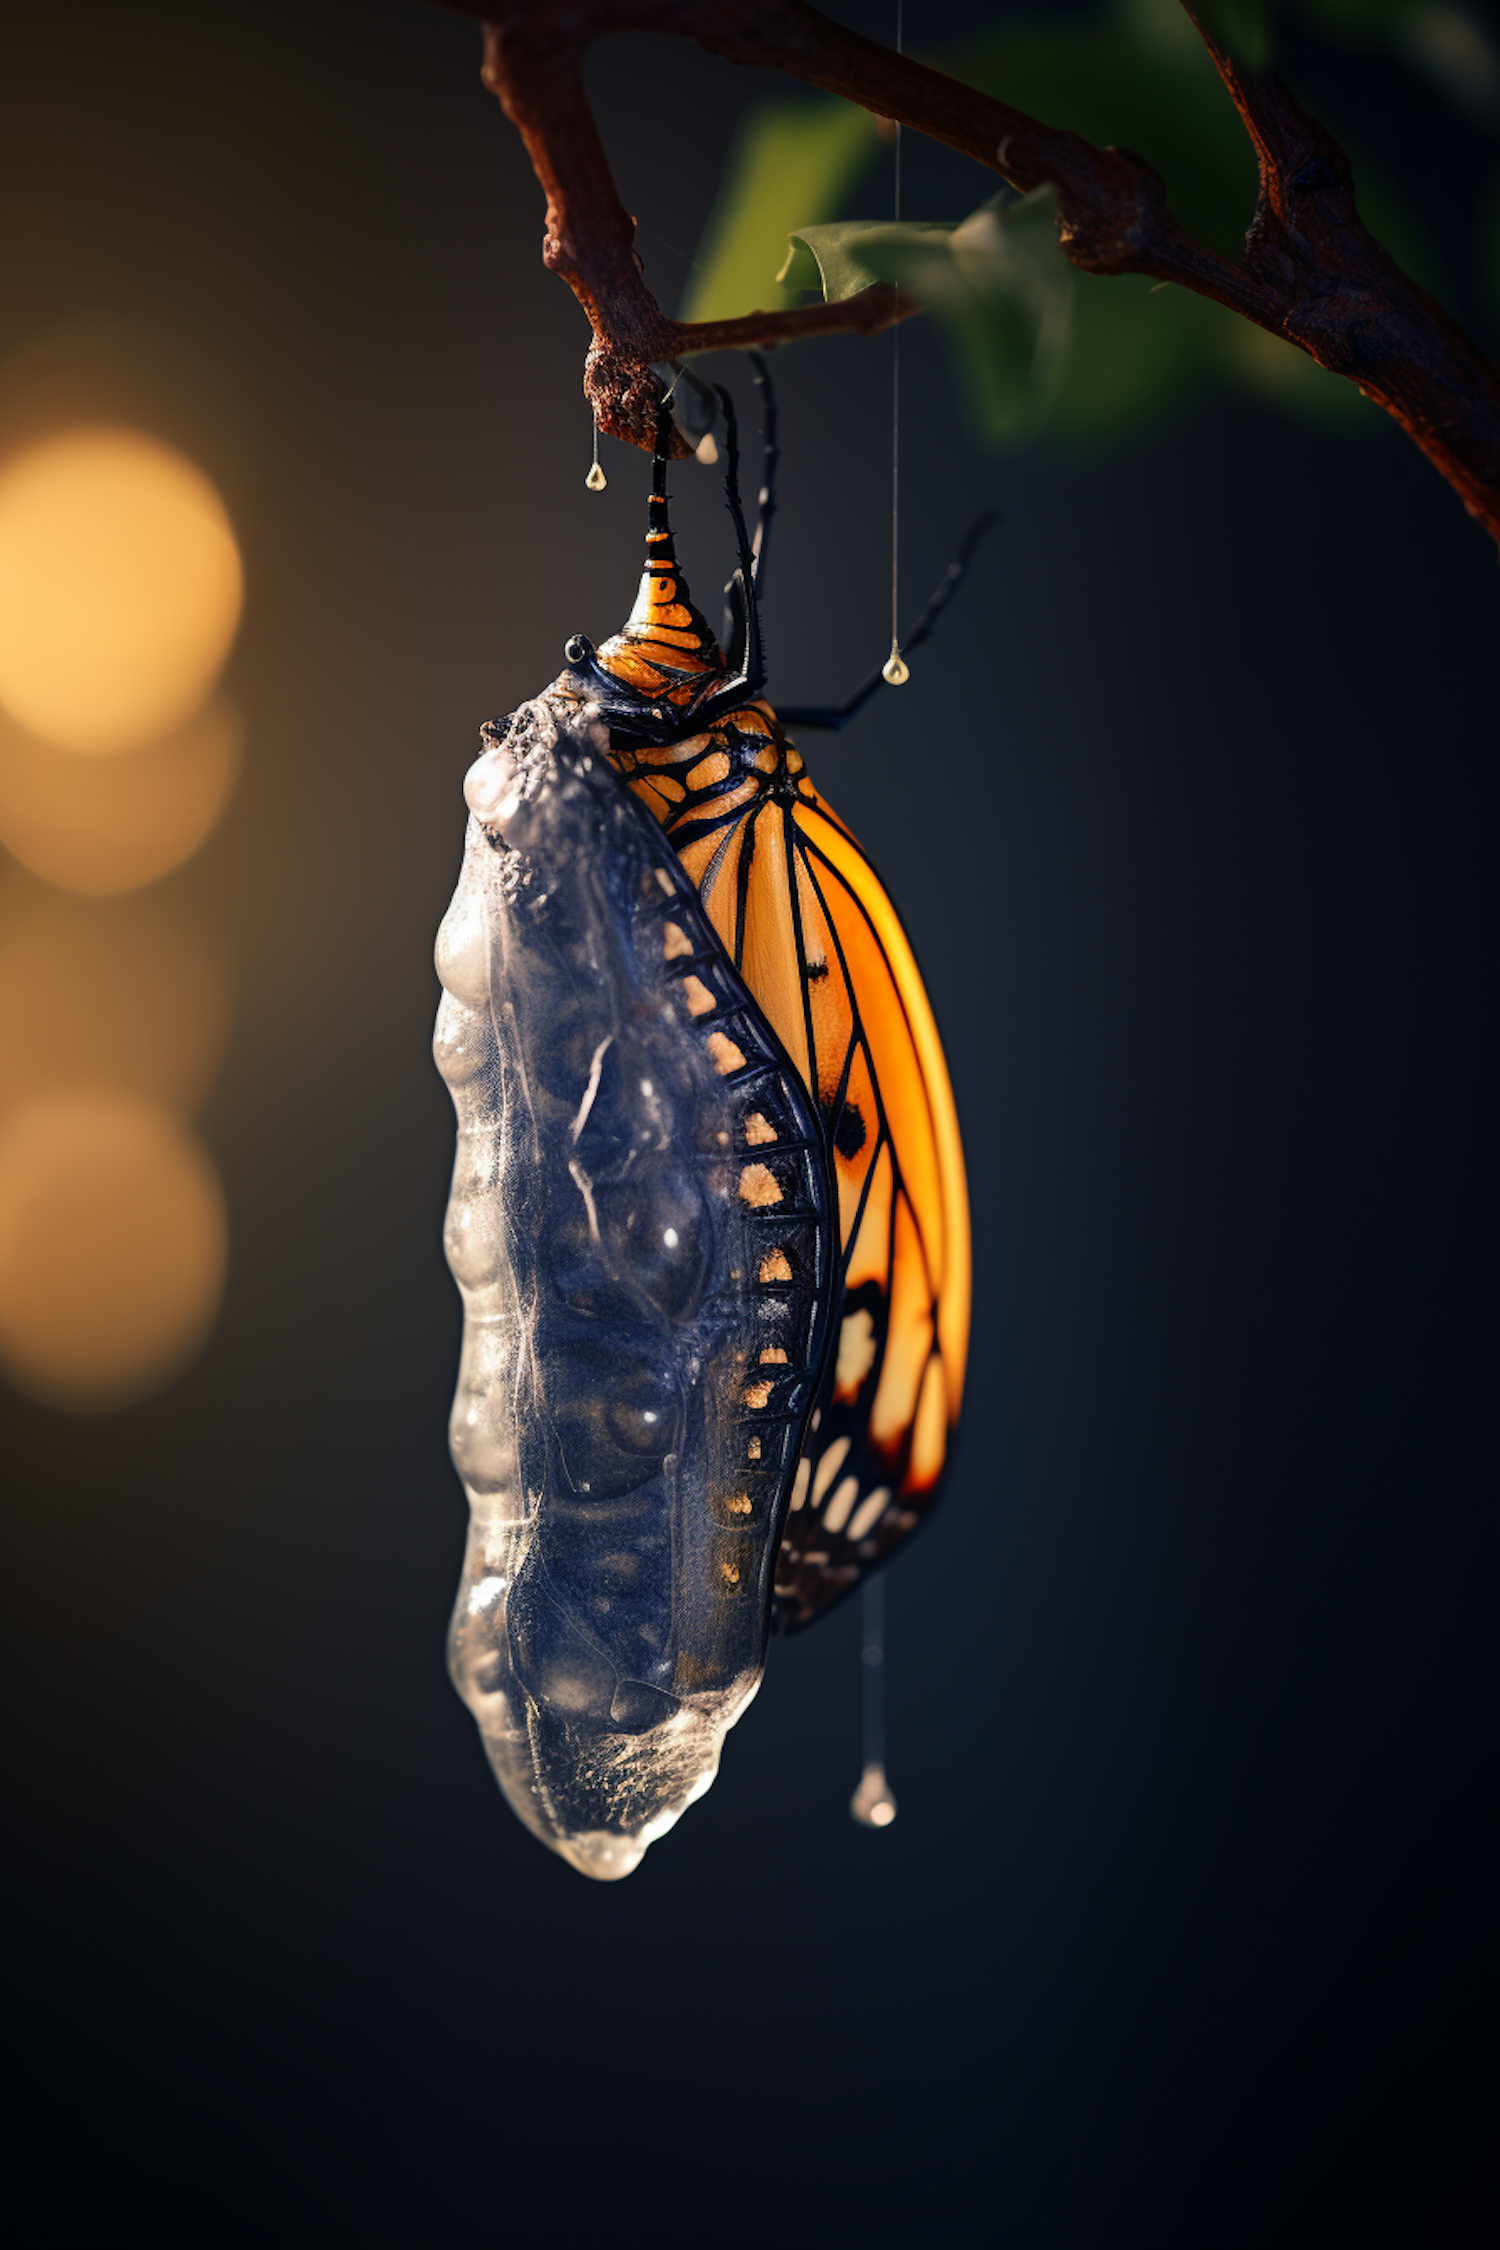 Monarch Emergence with Chrysalis